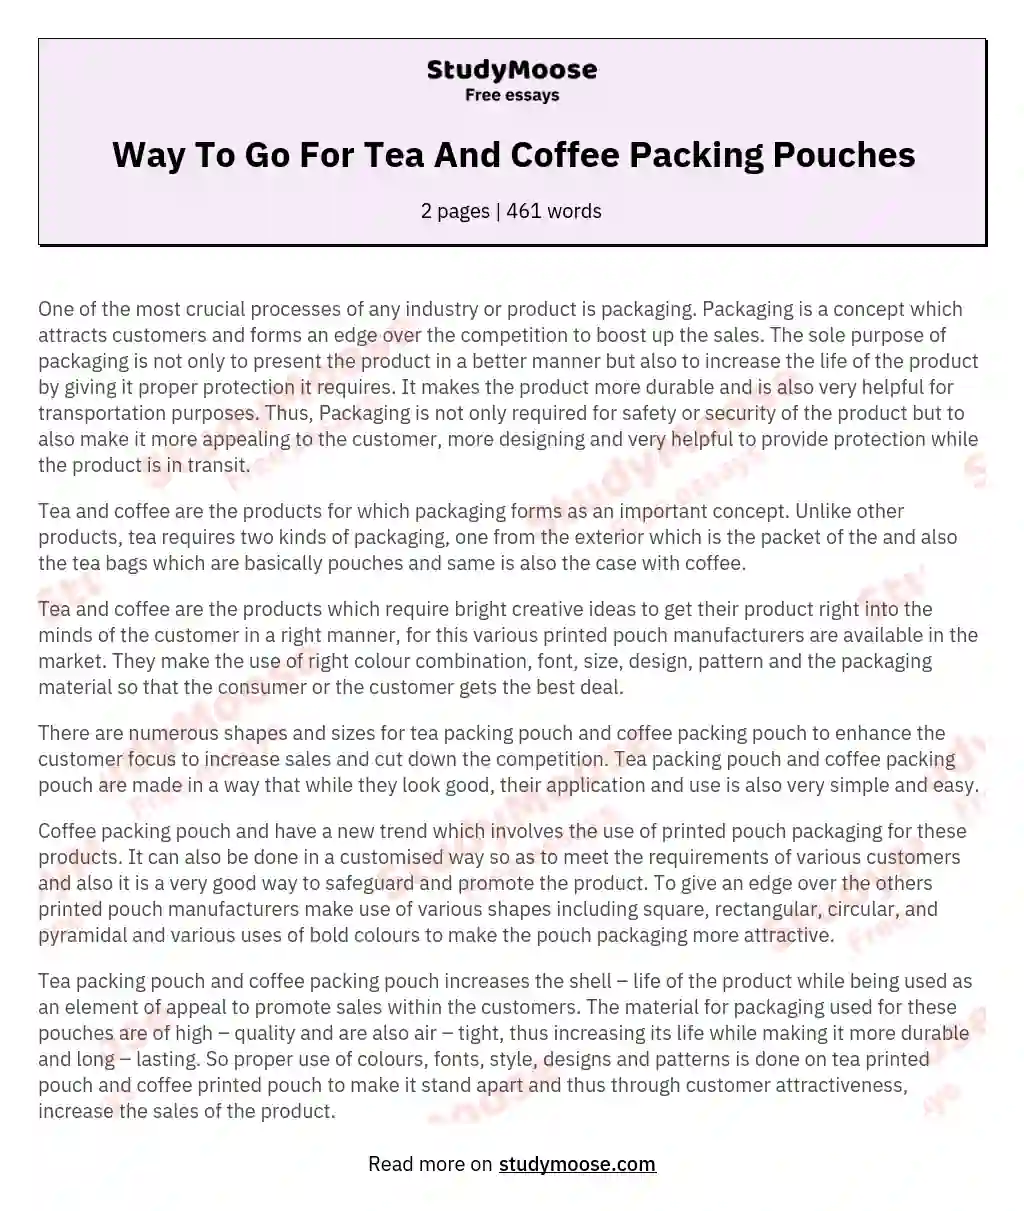 Way To Go For Tea And Coffee Packing Pouches essay